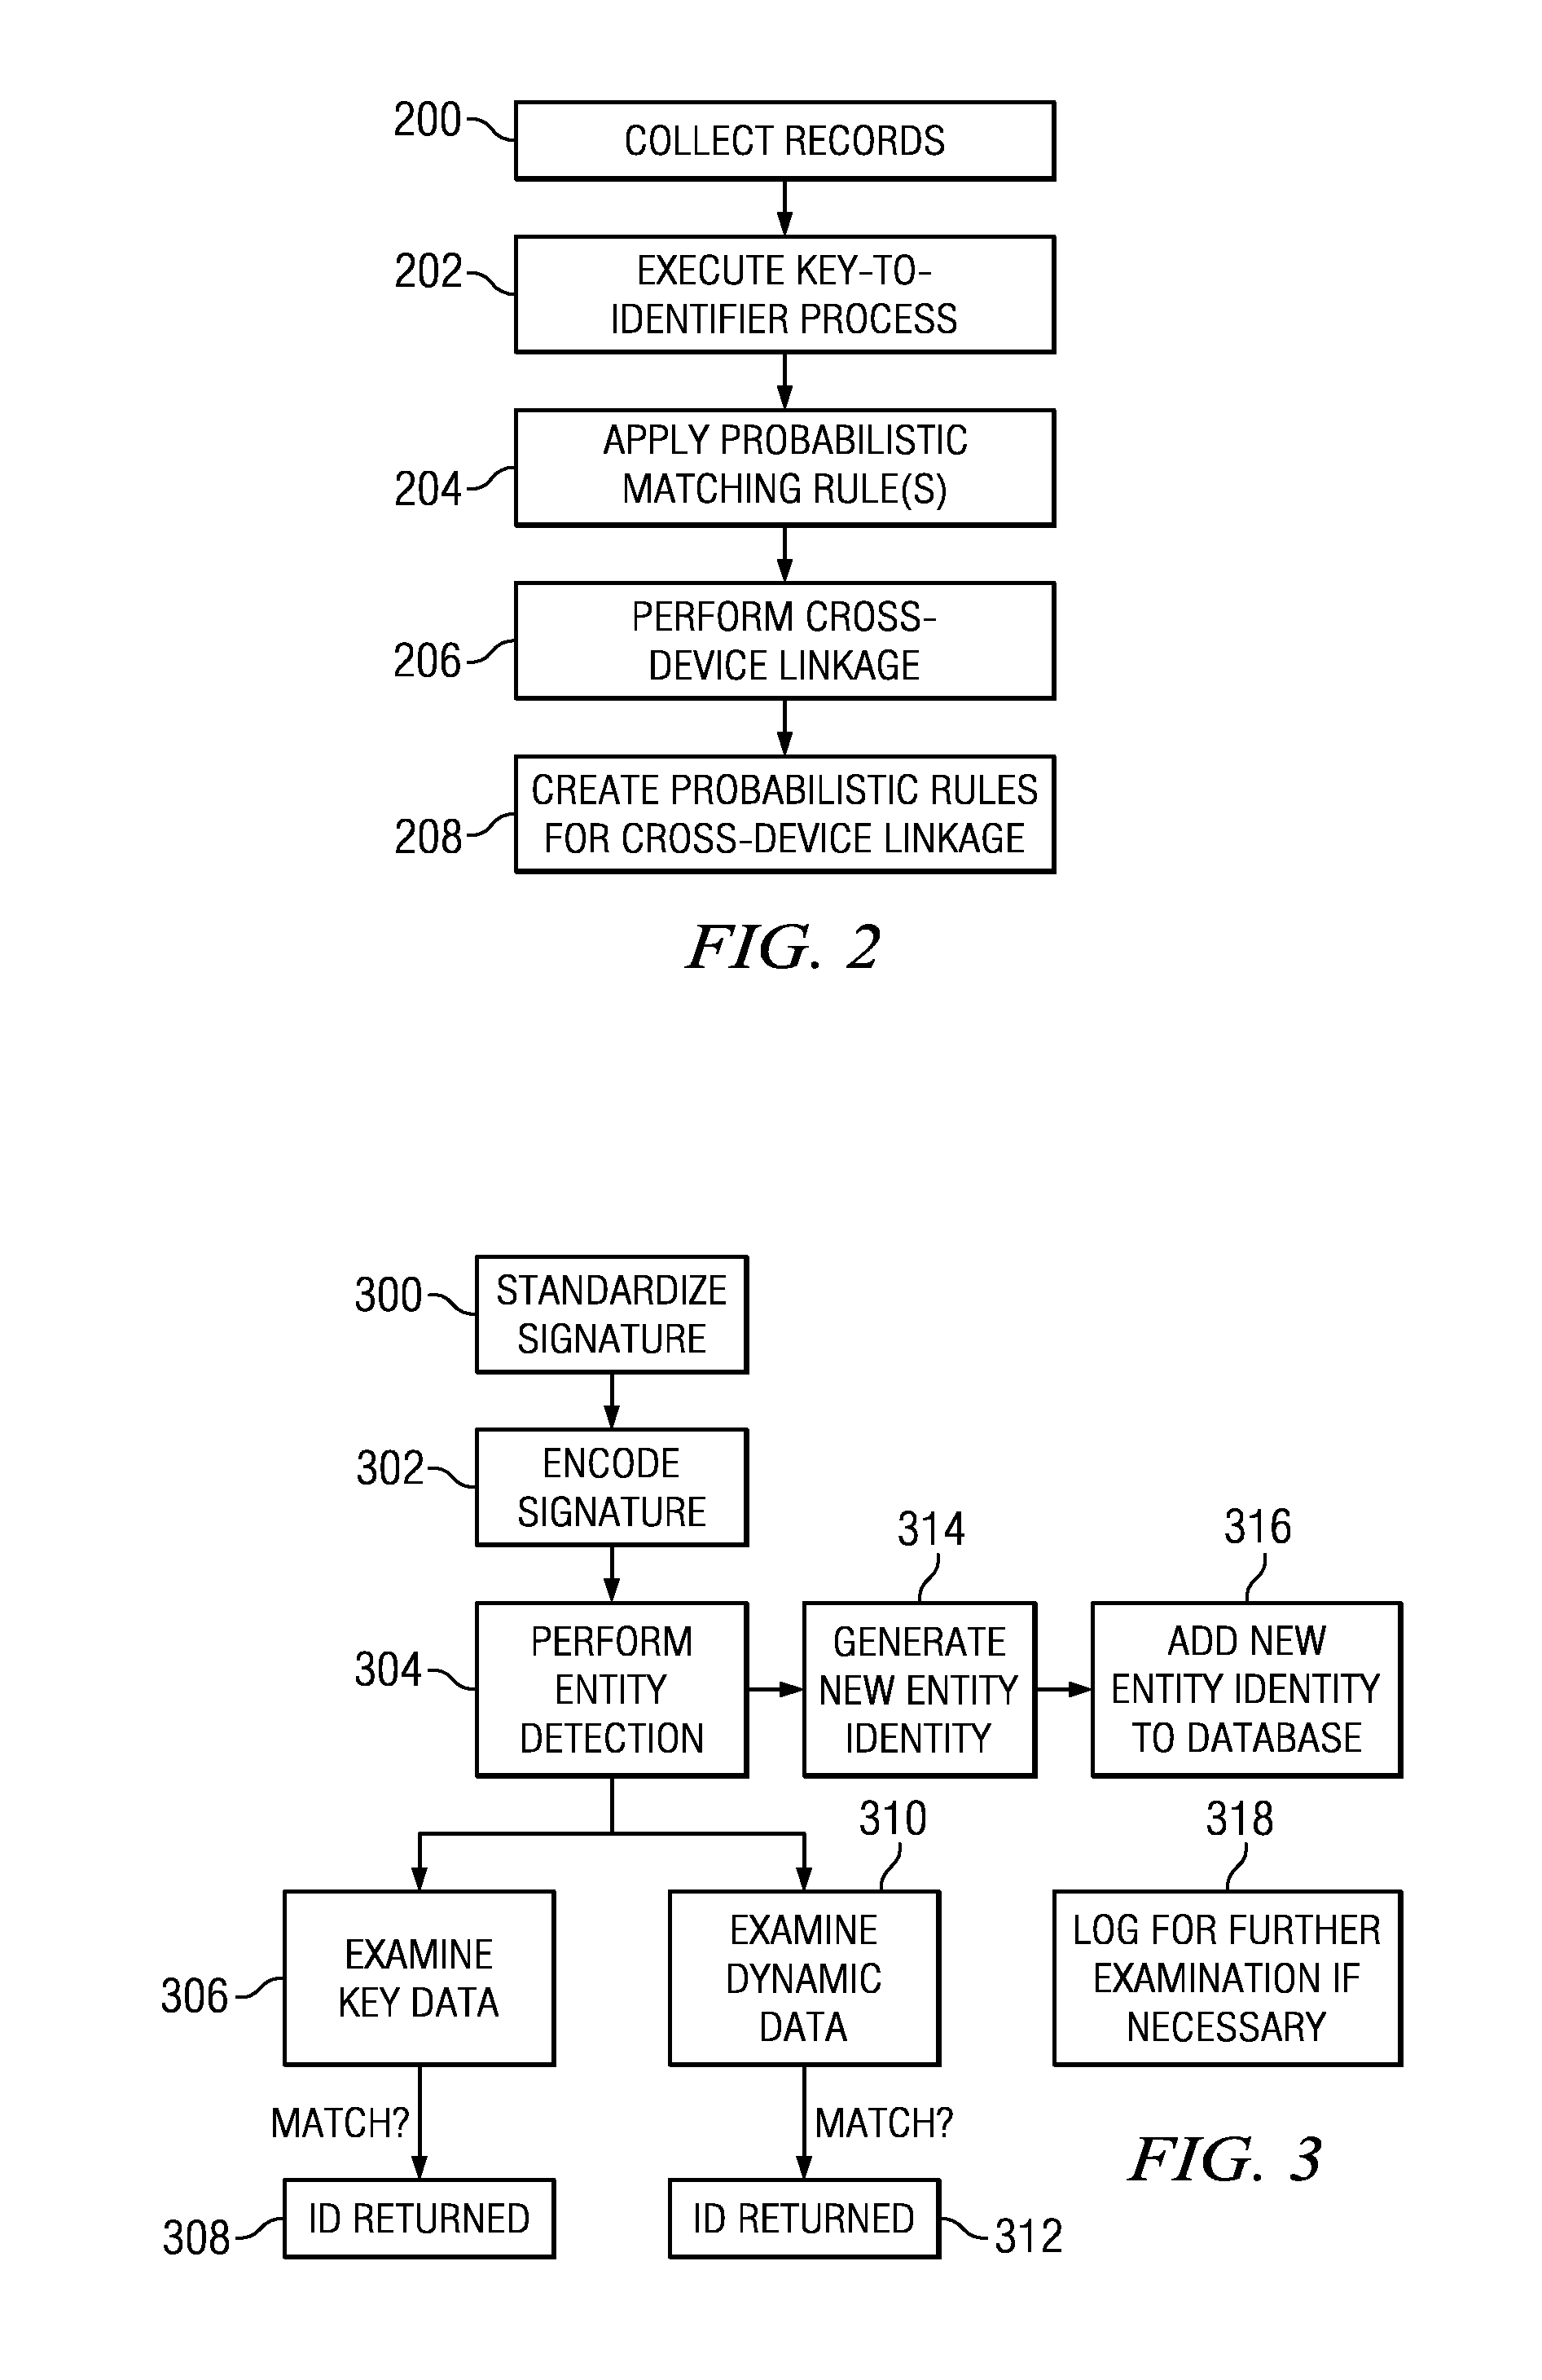 Uniquely identifying a network-connected entity